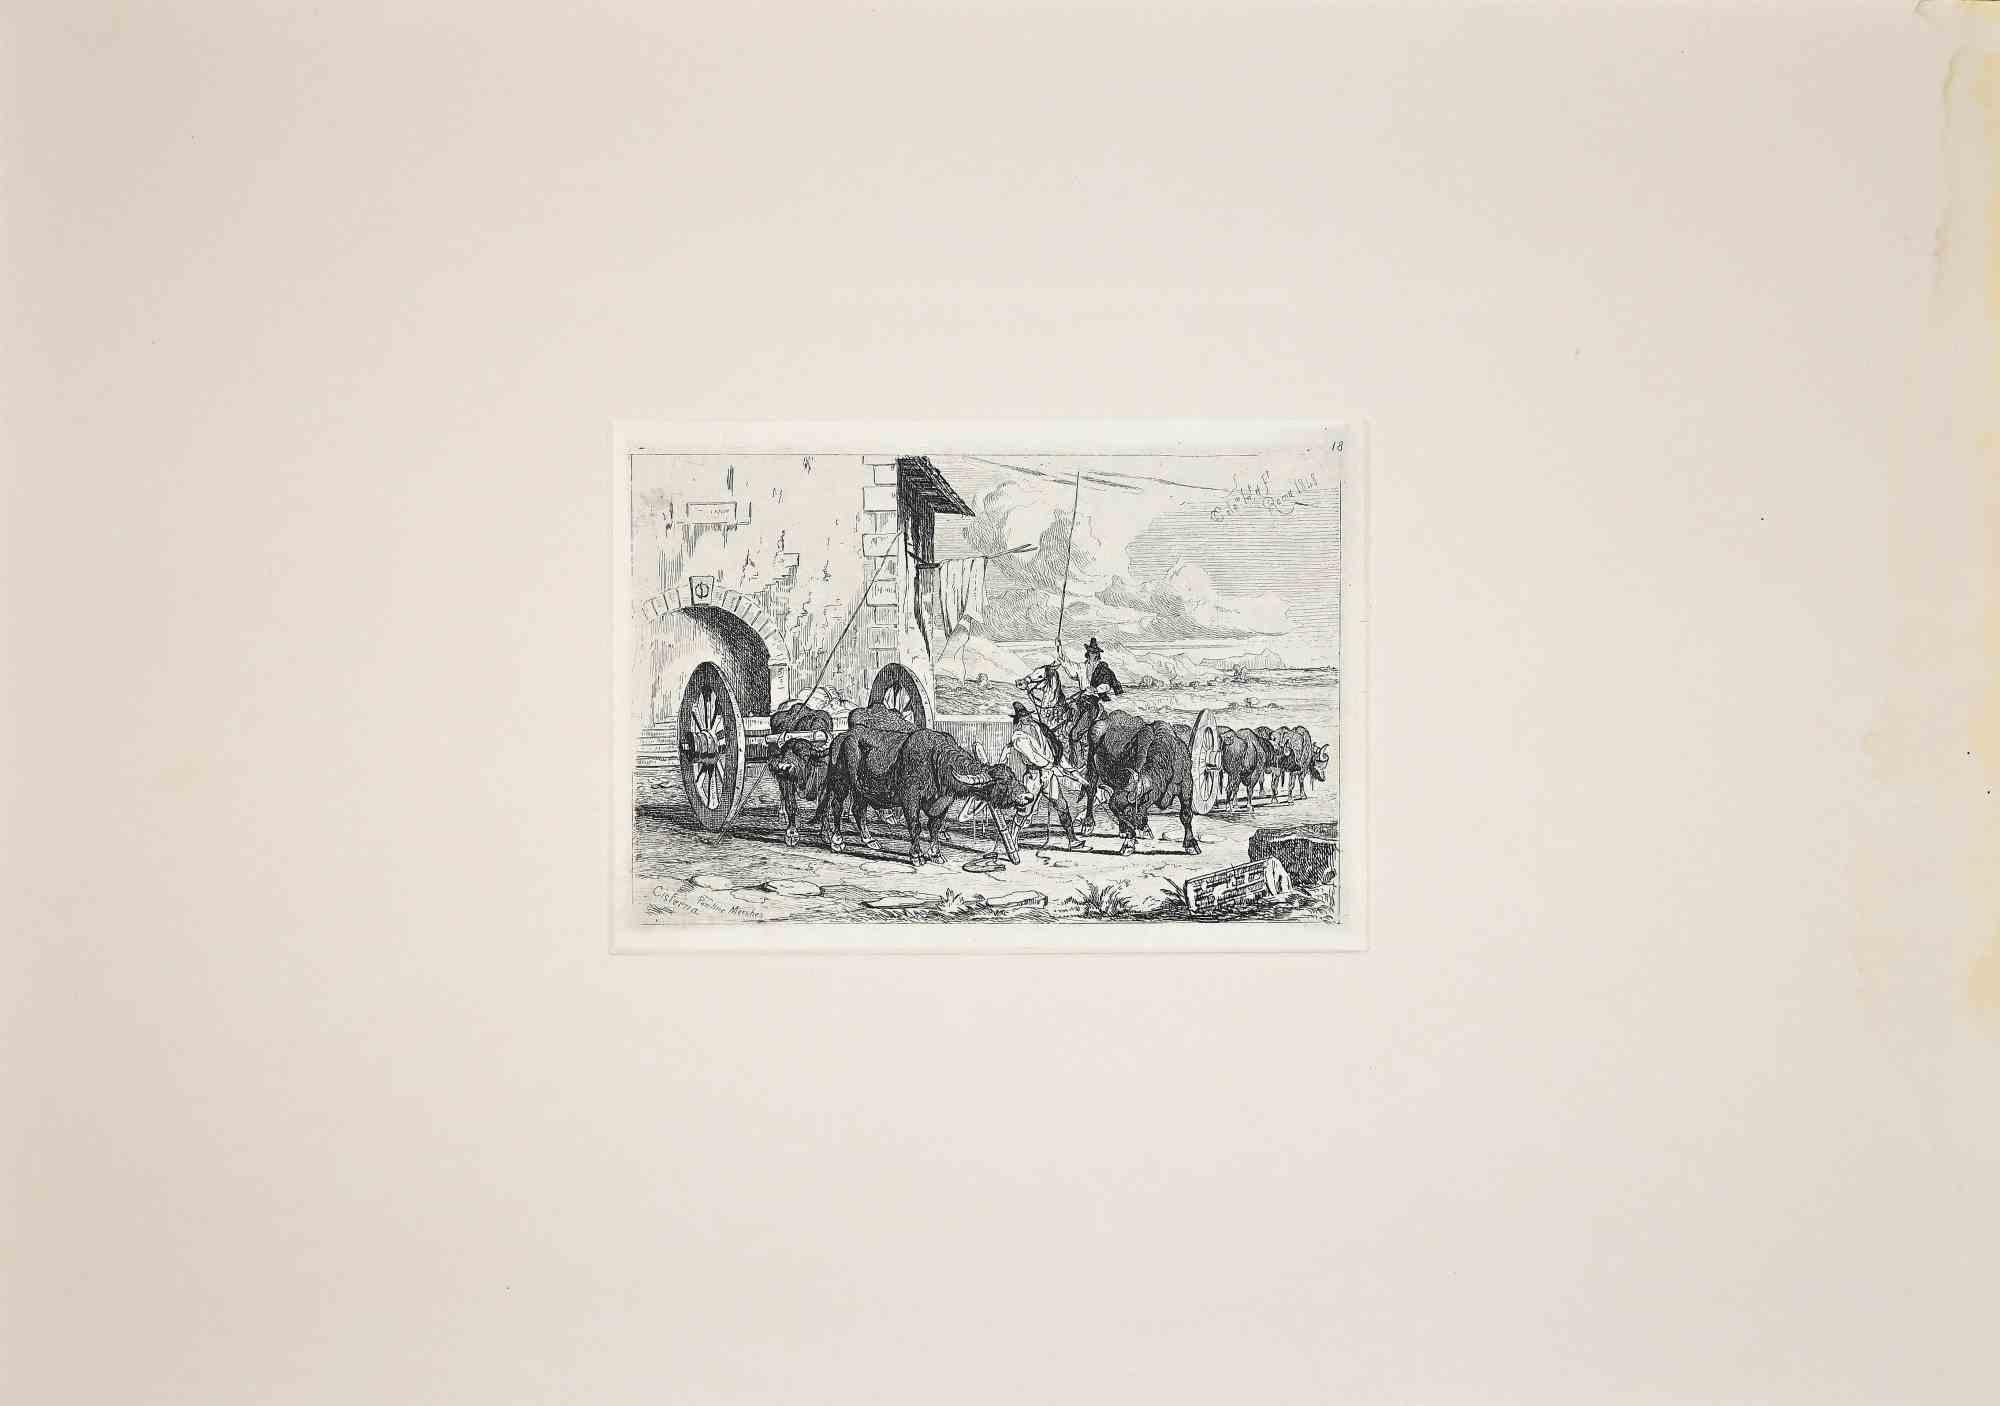 The Herding in Roman Countryside is an original etching artwork realized after Charles Coleman (1807, Yorkshire - 1874, Roma) in 1992.

Signed on the plate, the rare edition of only 25 copies.

Good condition with a minor stain on the frame of the